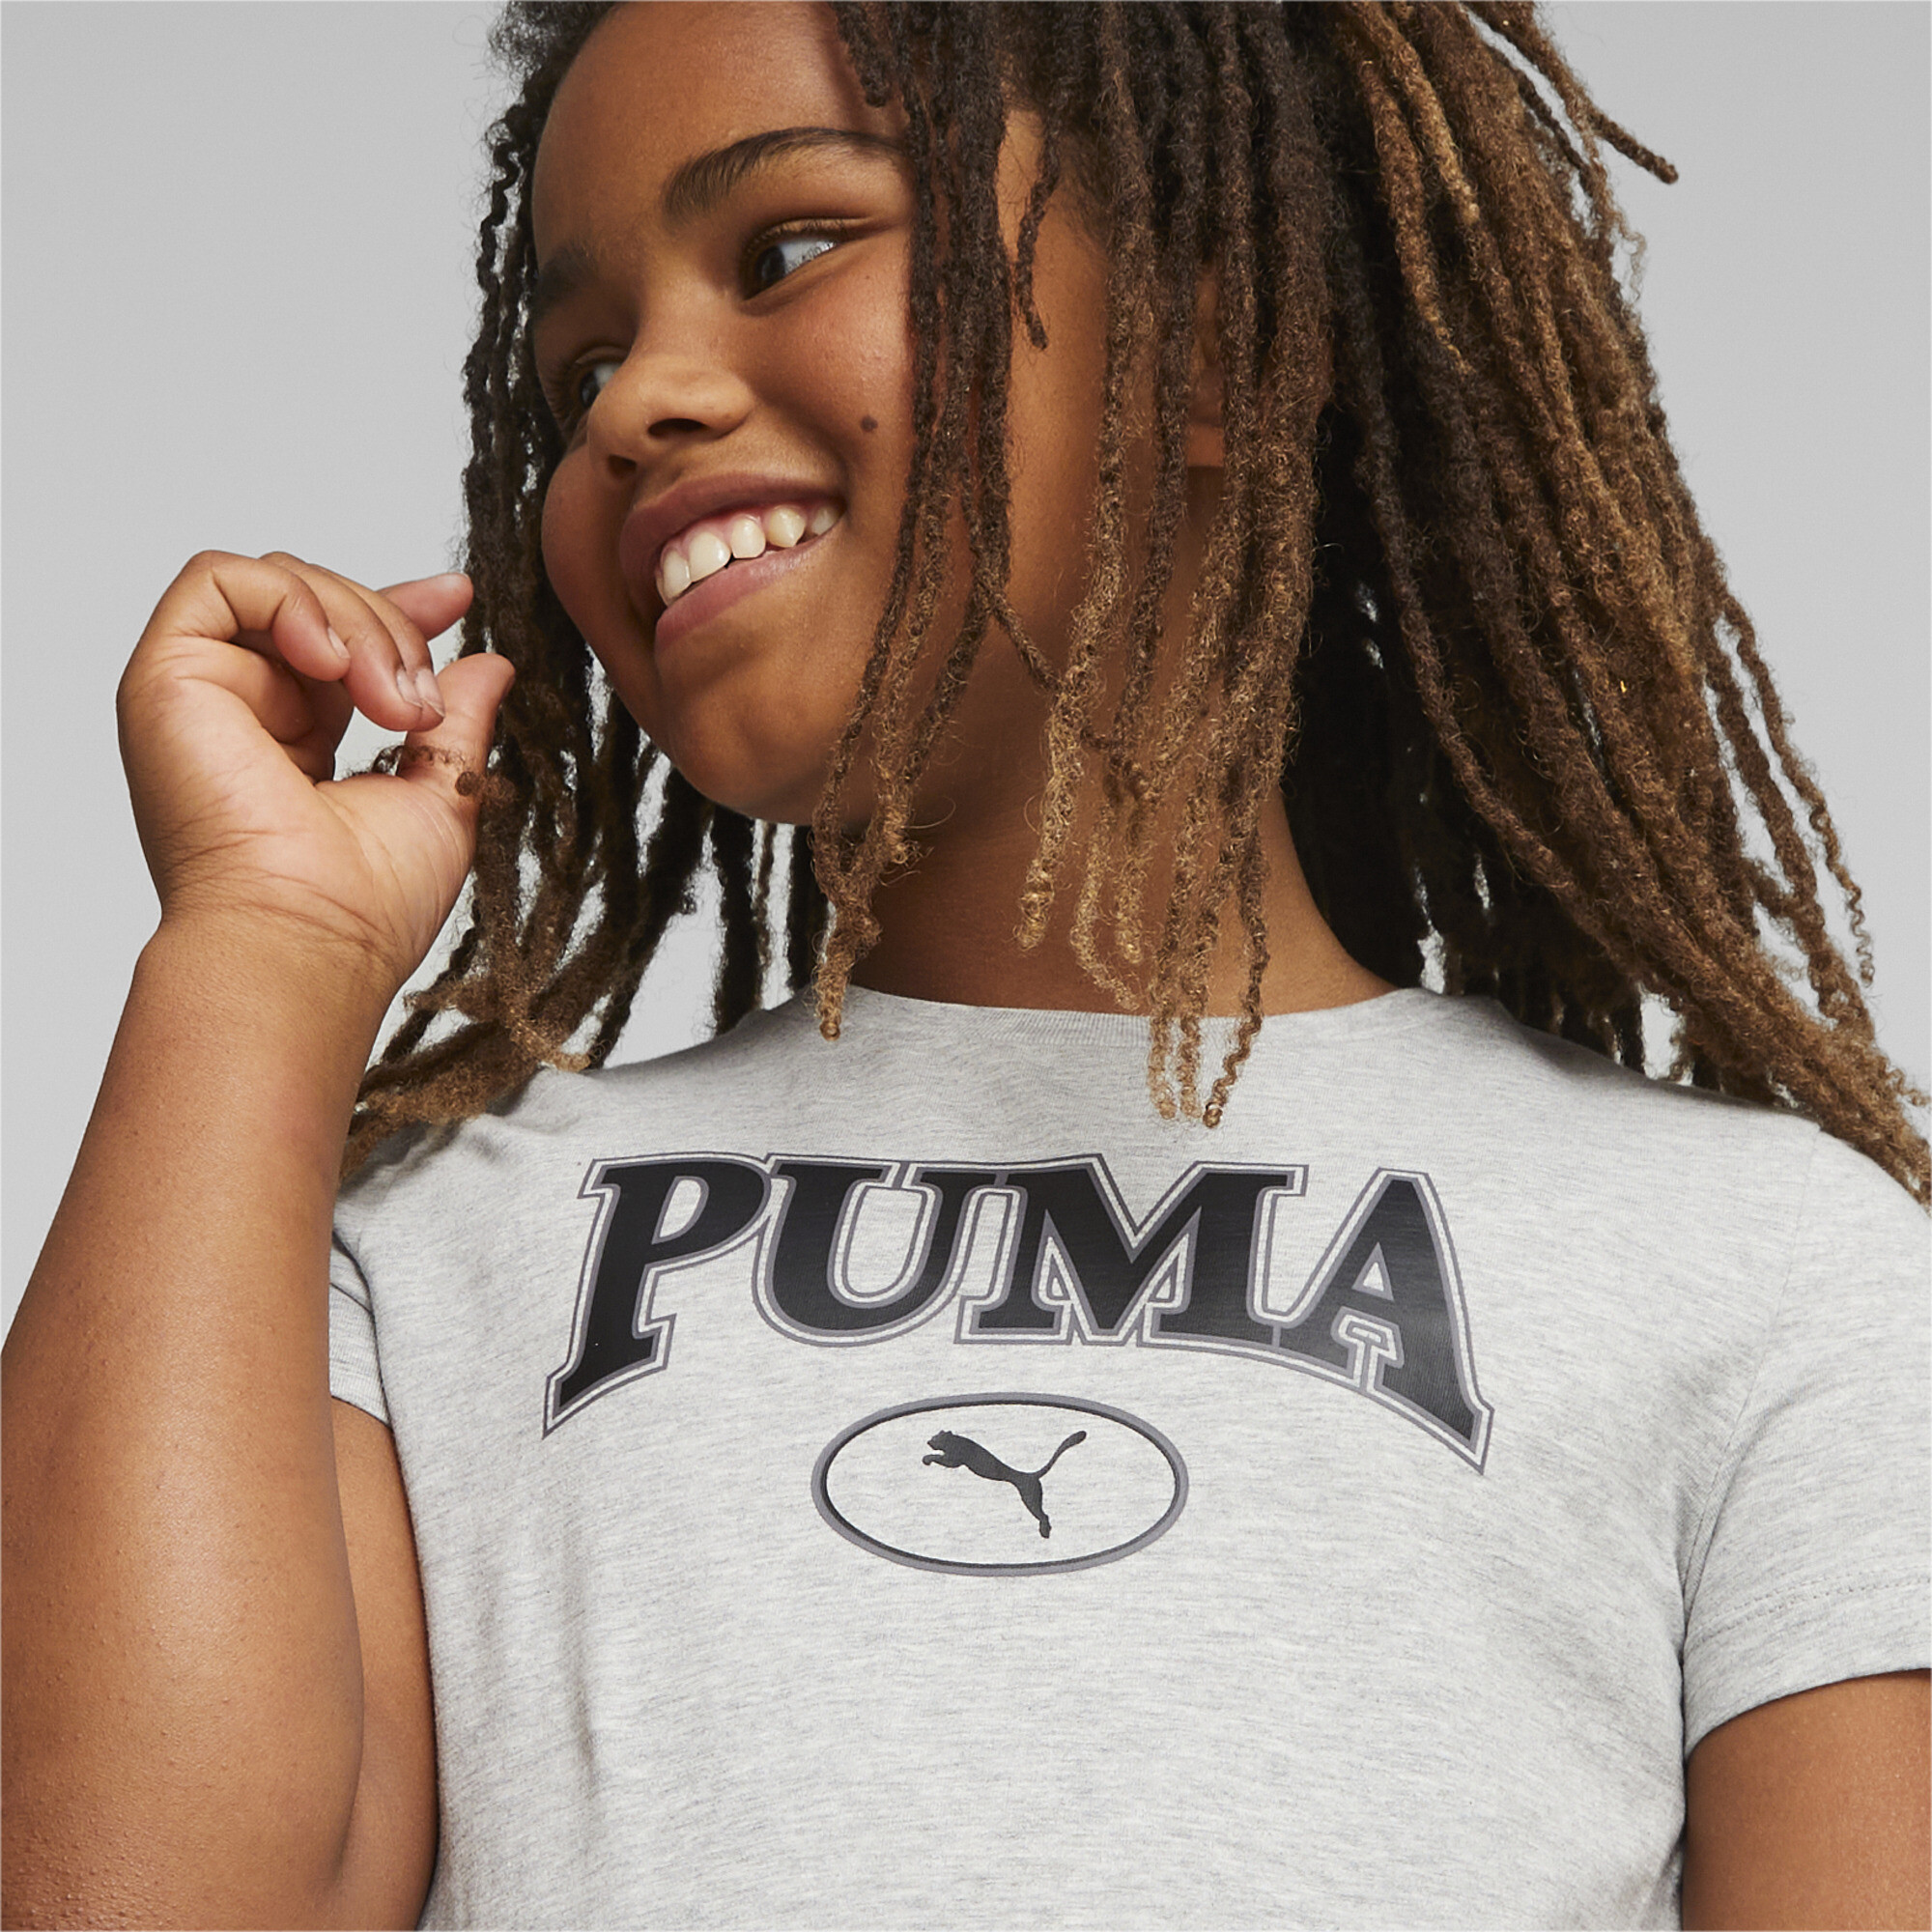 PUMA SQUAD Graphic T-Shirt In Heather, Size 15-16 Youth